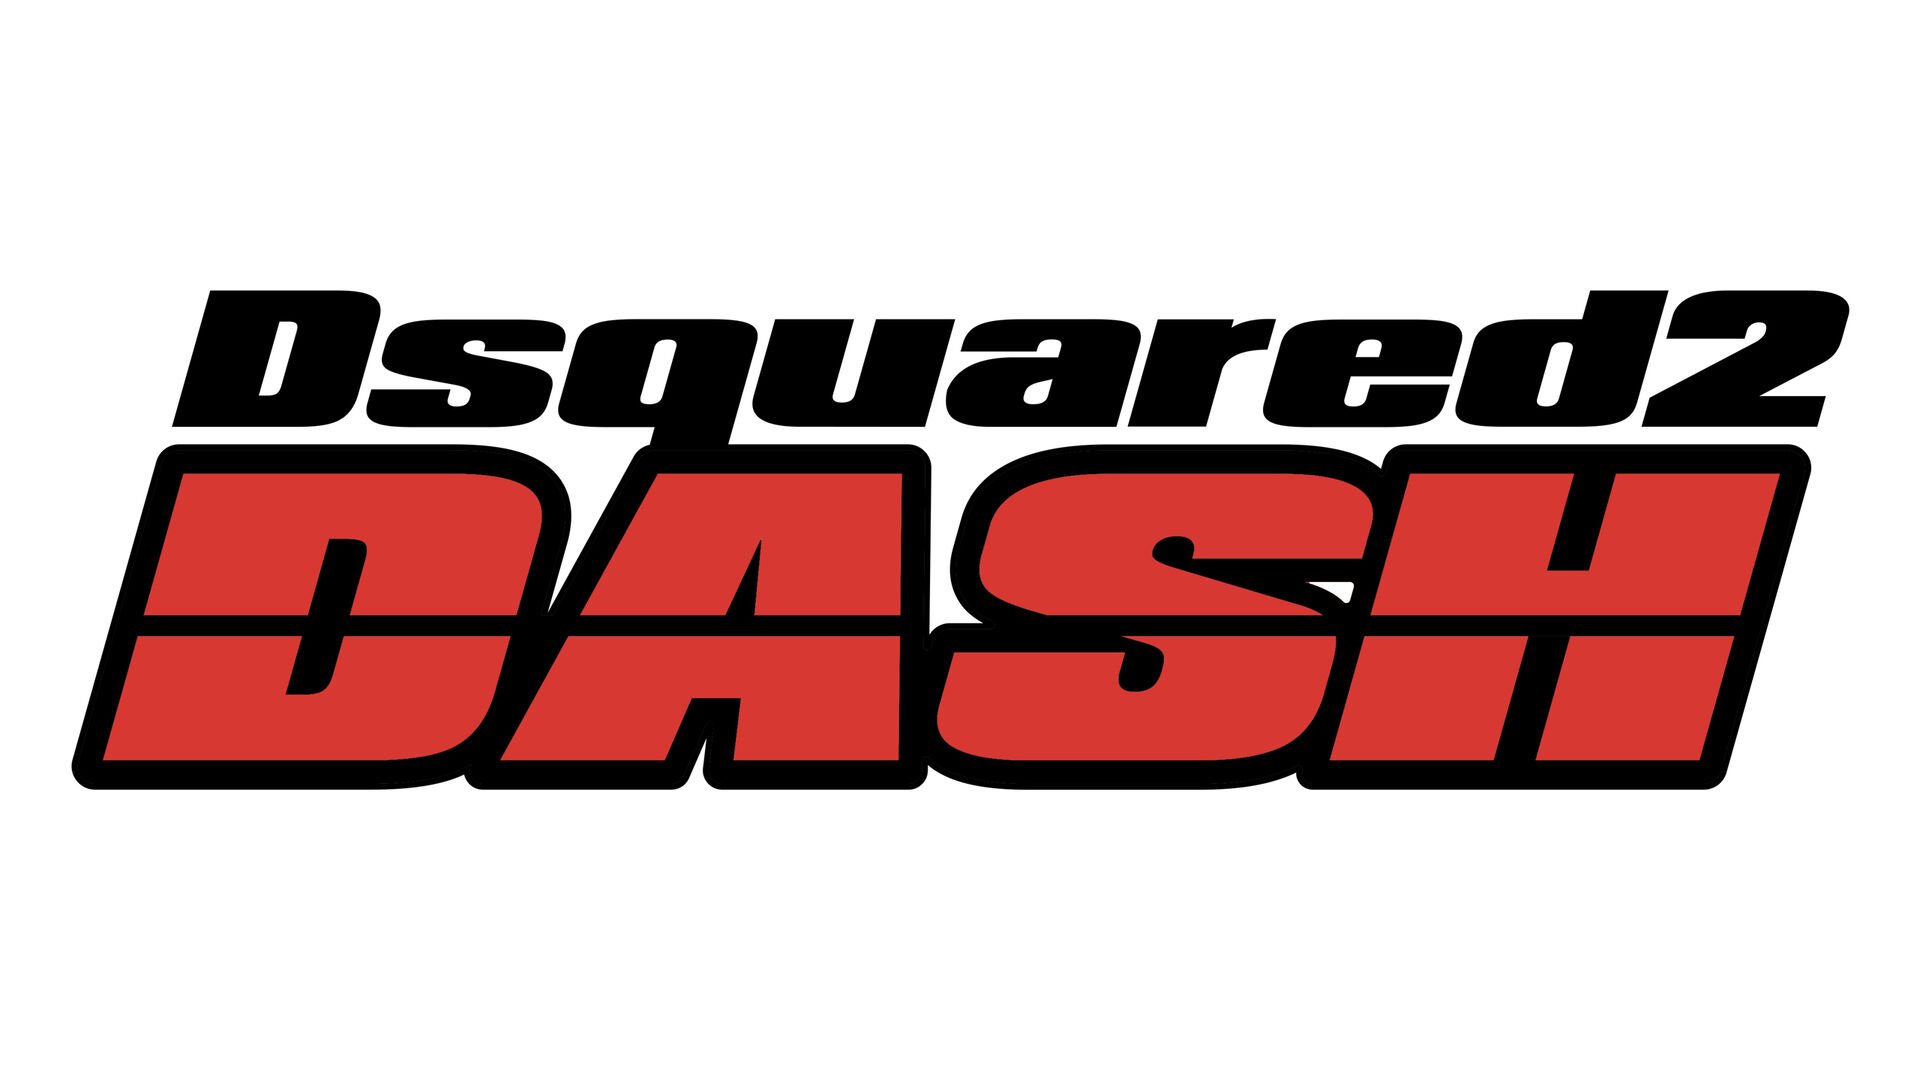 Dsquared2 Dash logo in black and red on white background